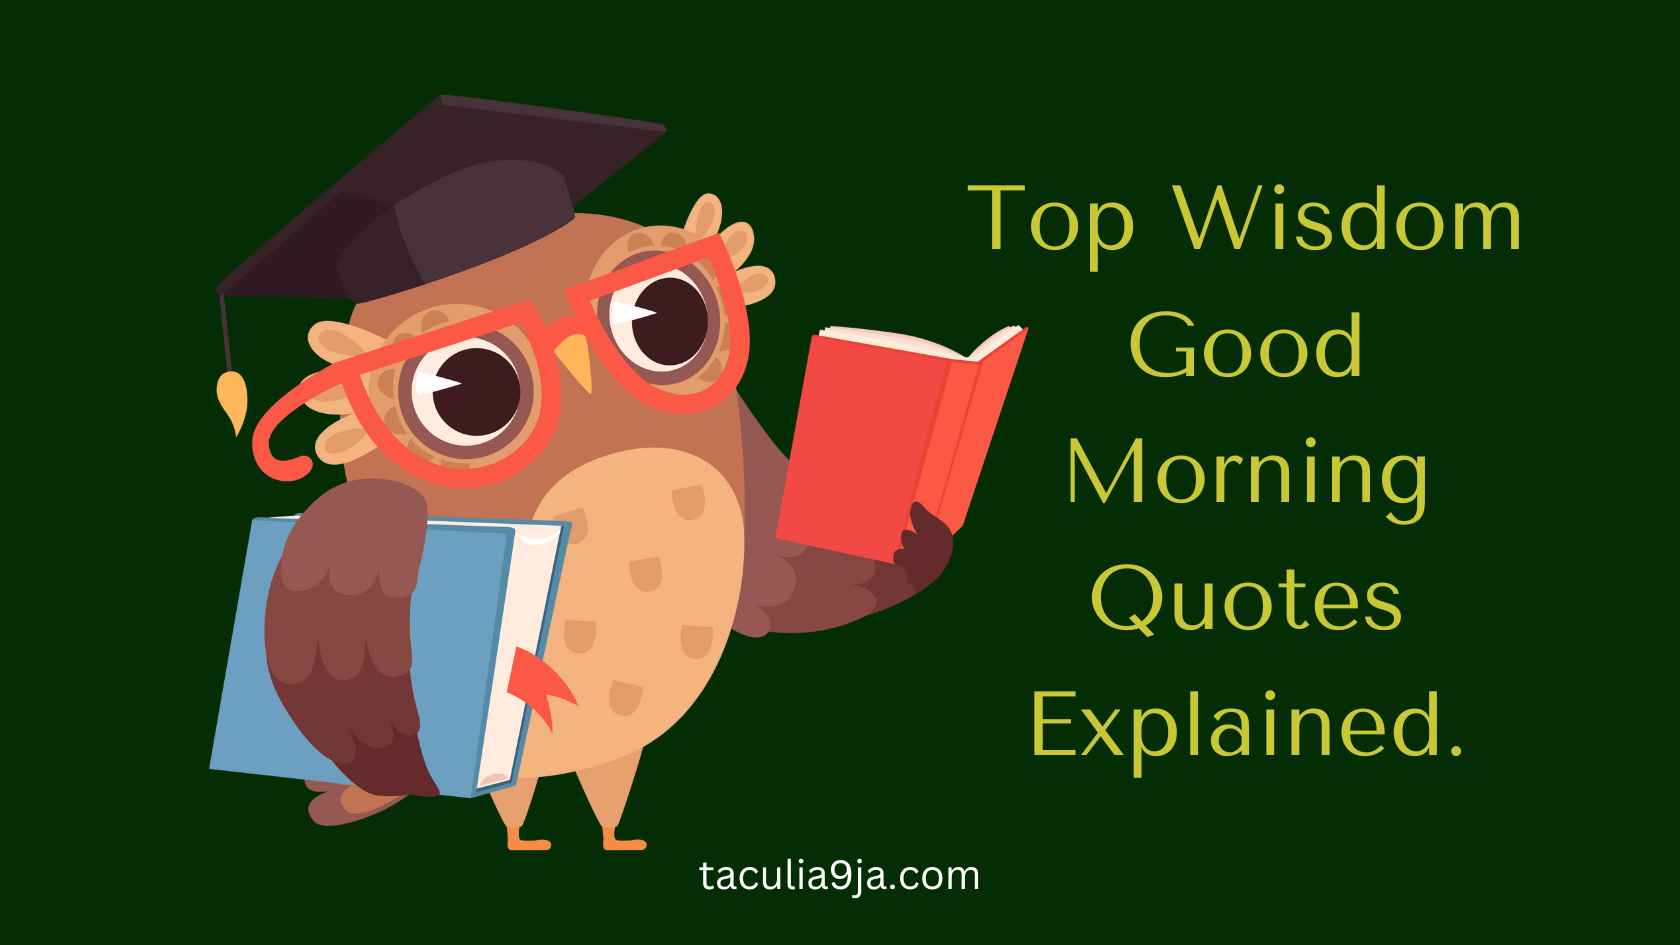 Top Wisdom Good Morning Quotes Explained.